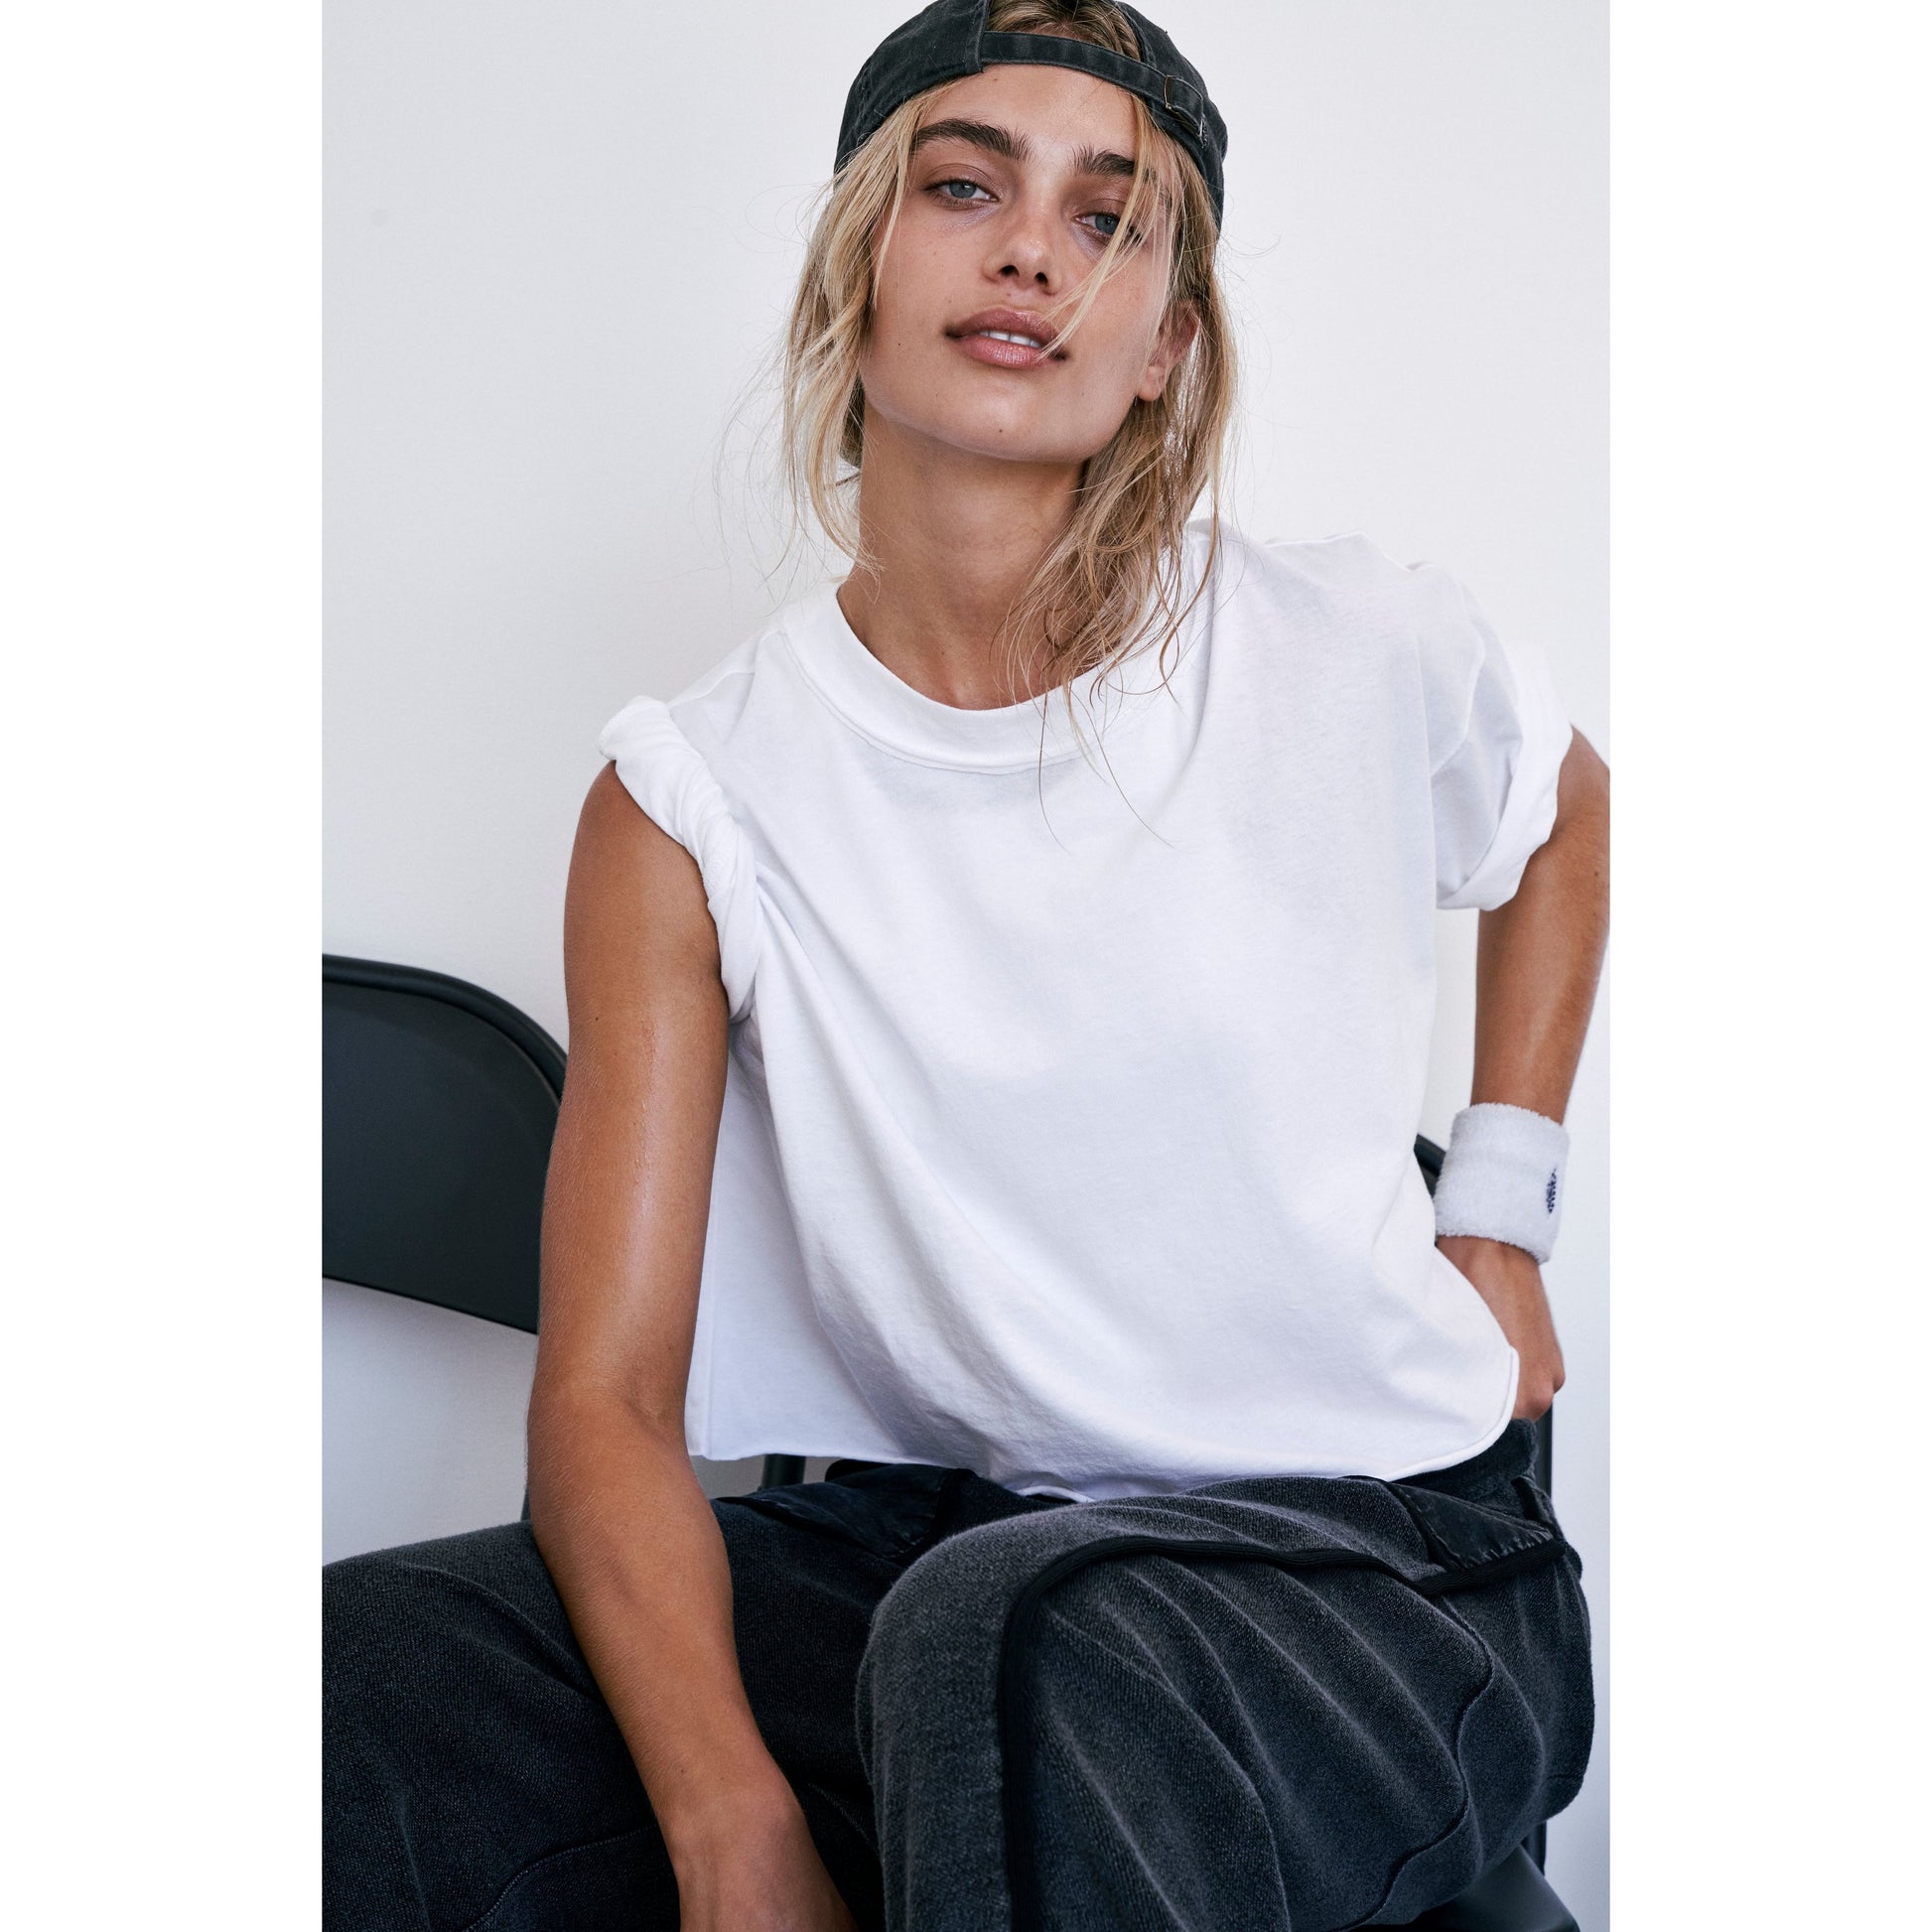 Young woman in an oversized white Free People Movement Inspire Tee and black cap sitting on a chair against a white background, looking casually at the camera.